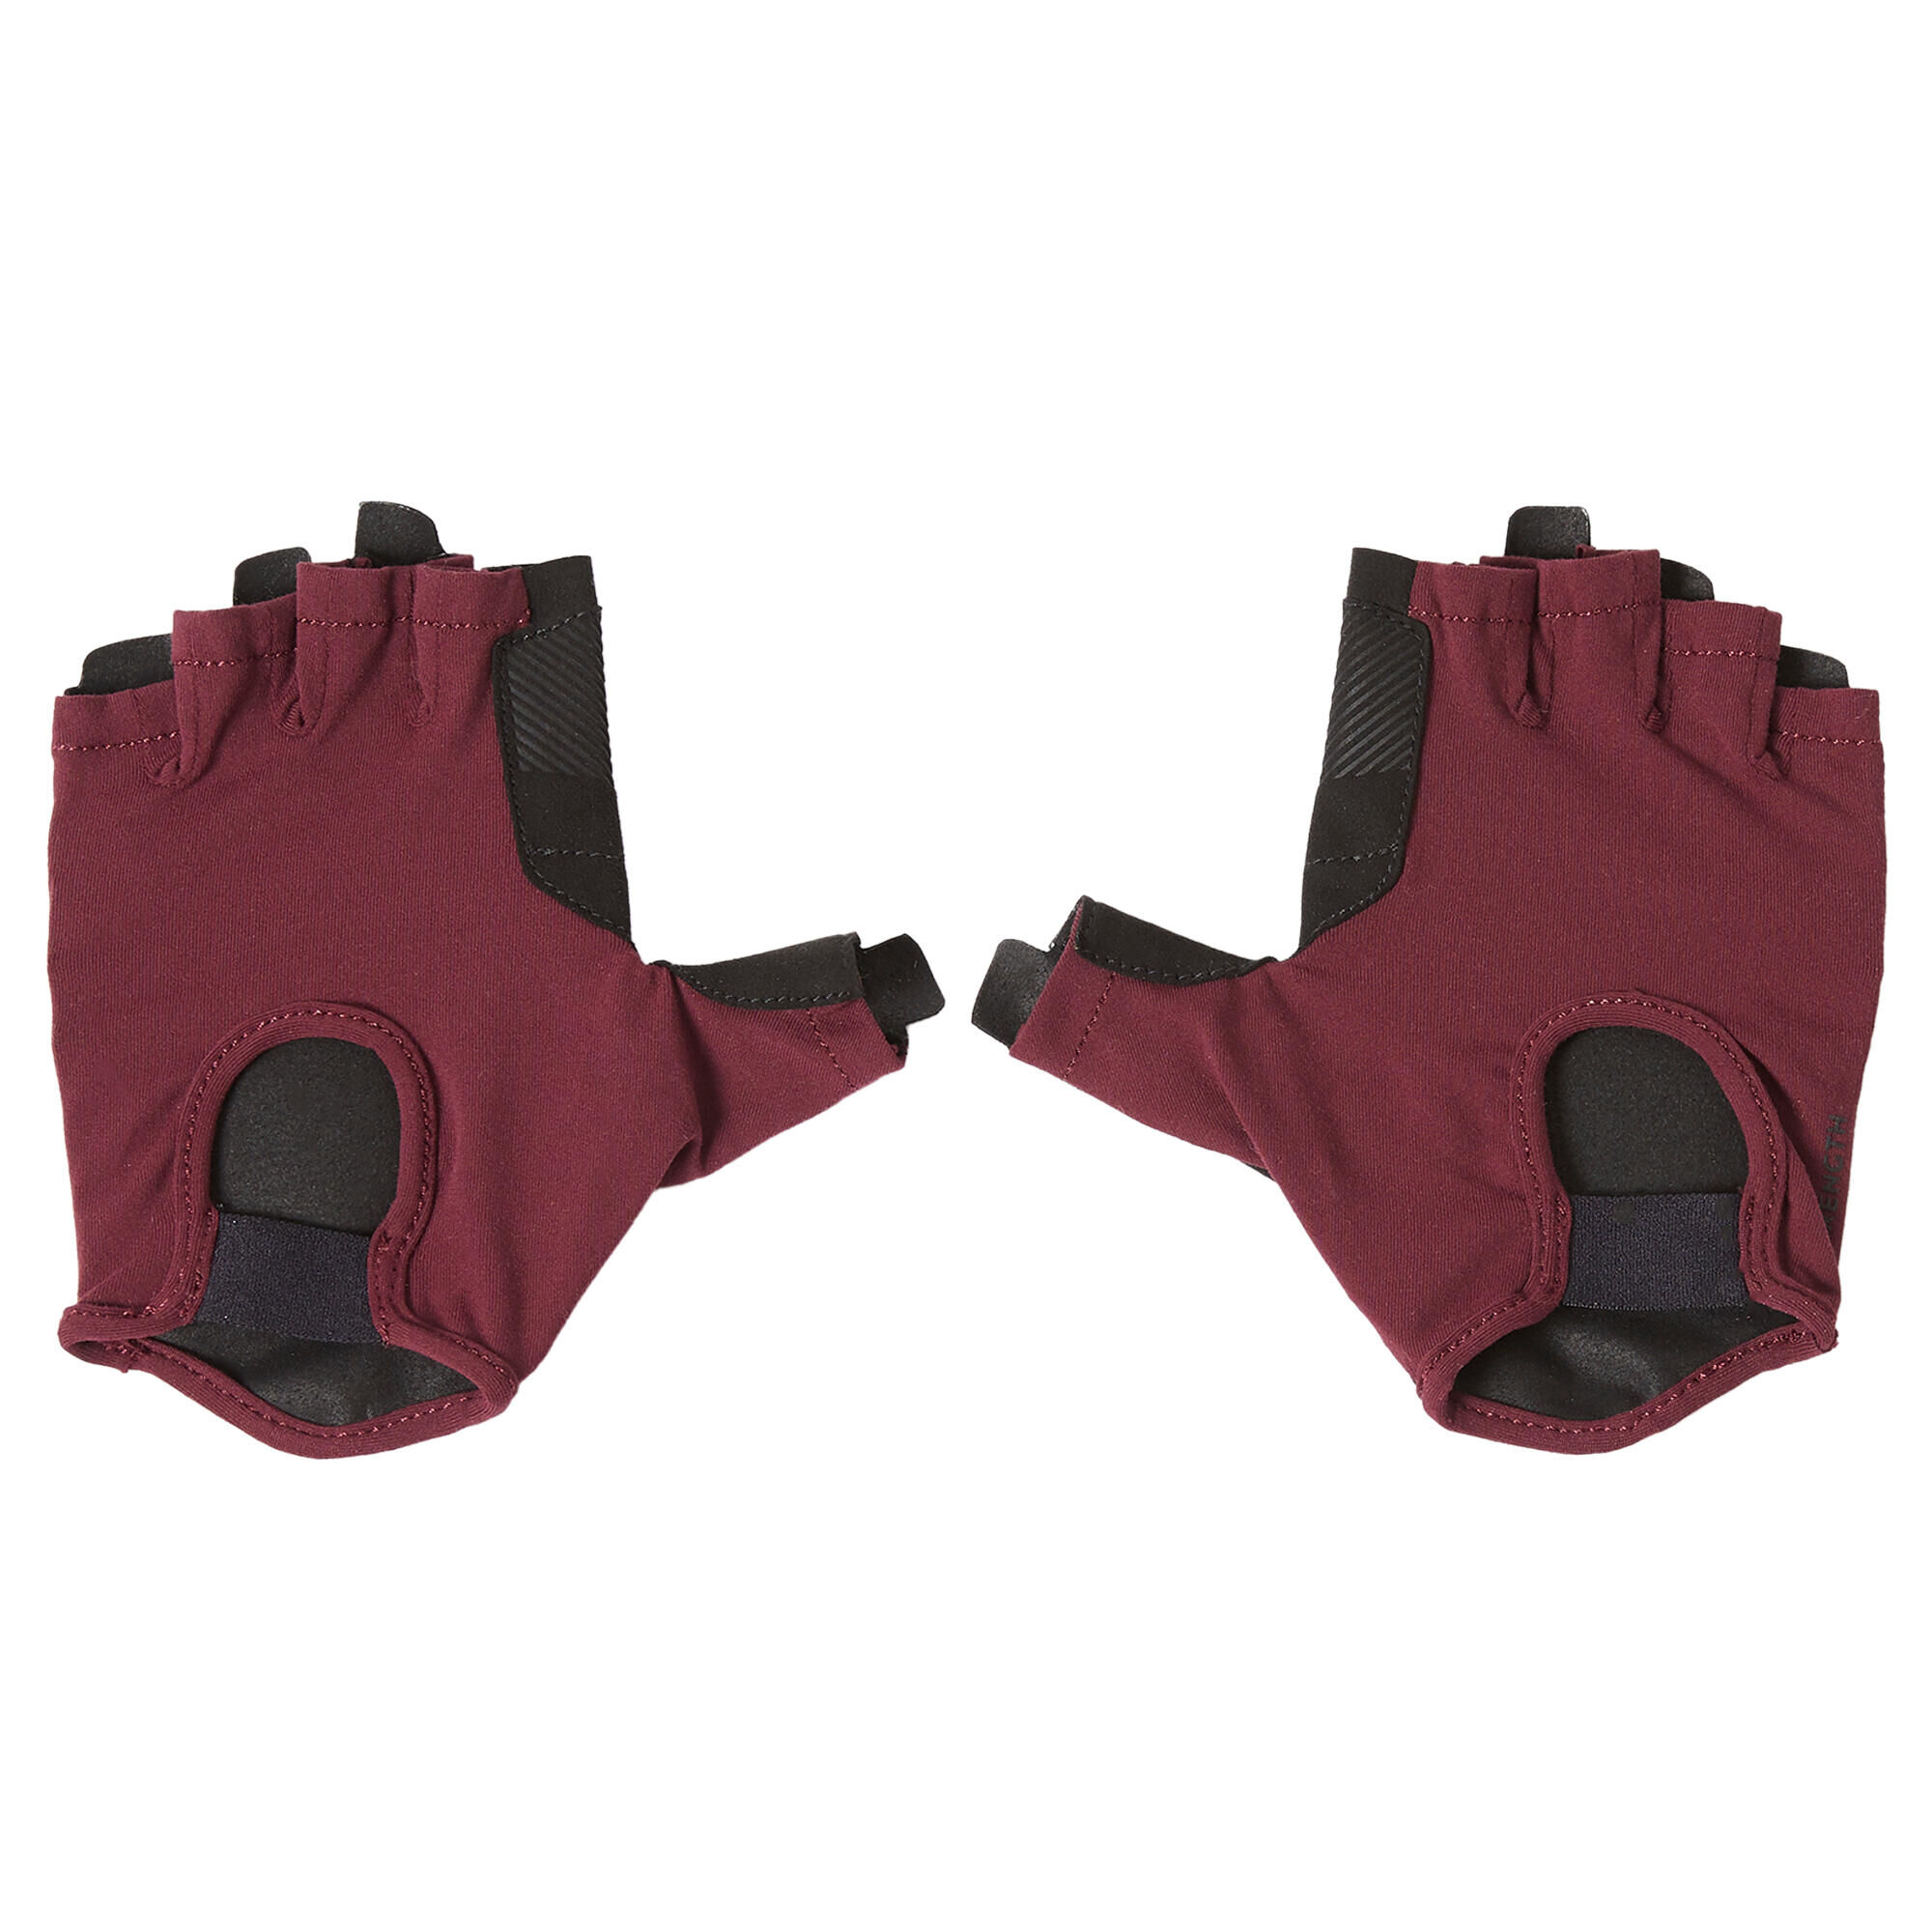 DOMYOS Women's Breathable Weight Training Gloves - Burgundy